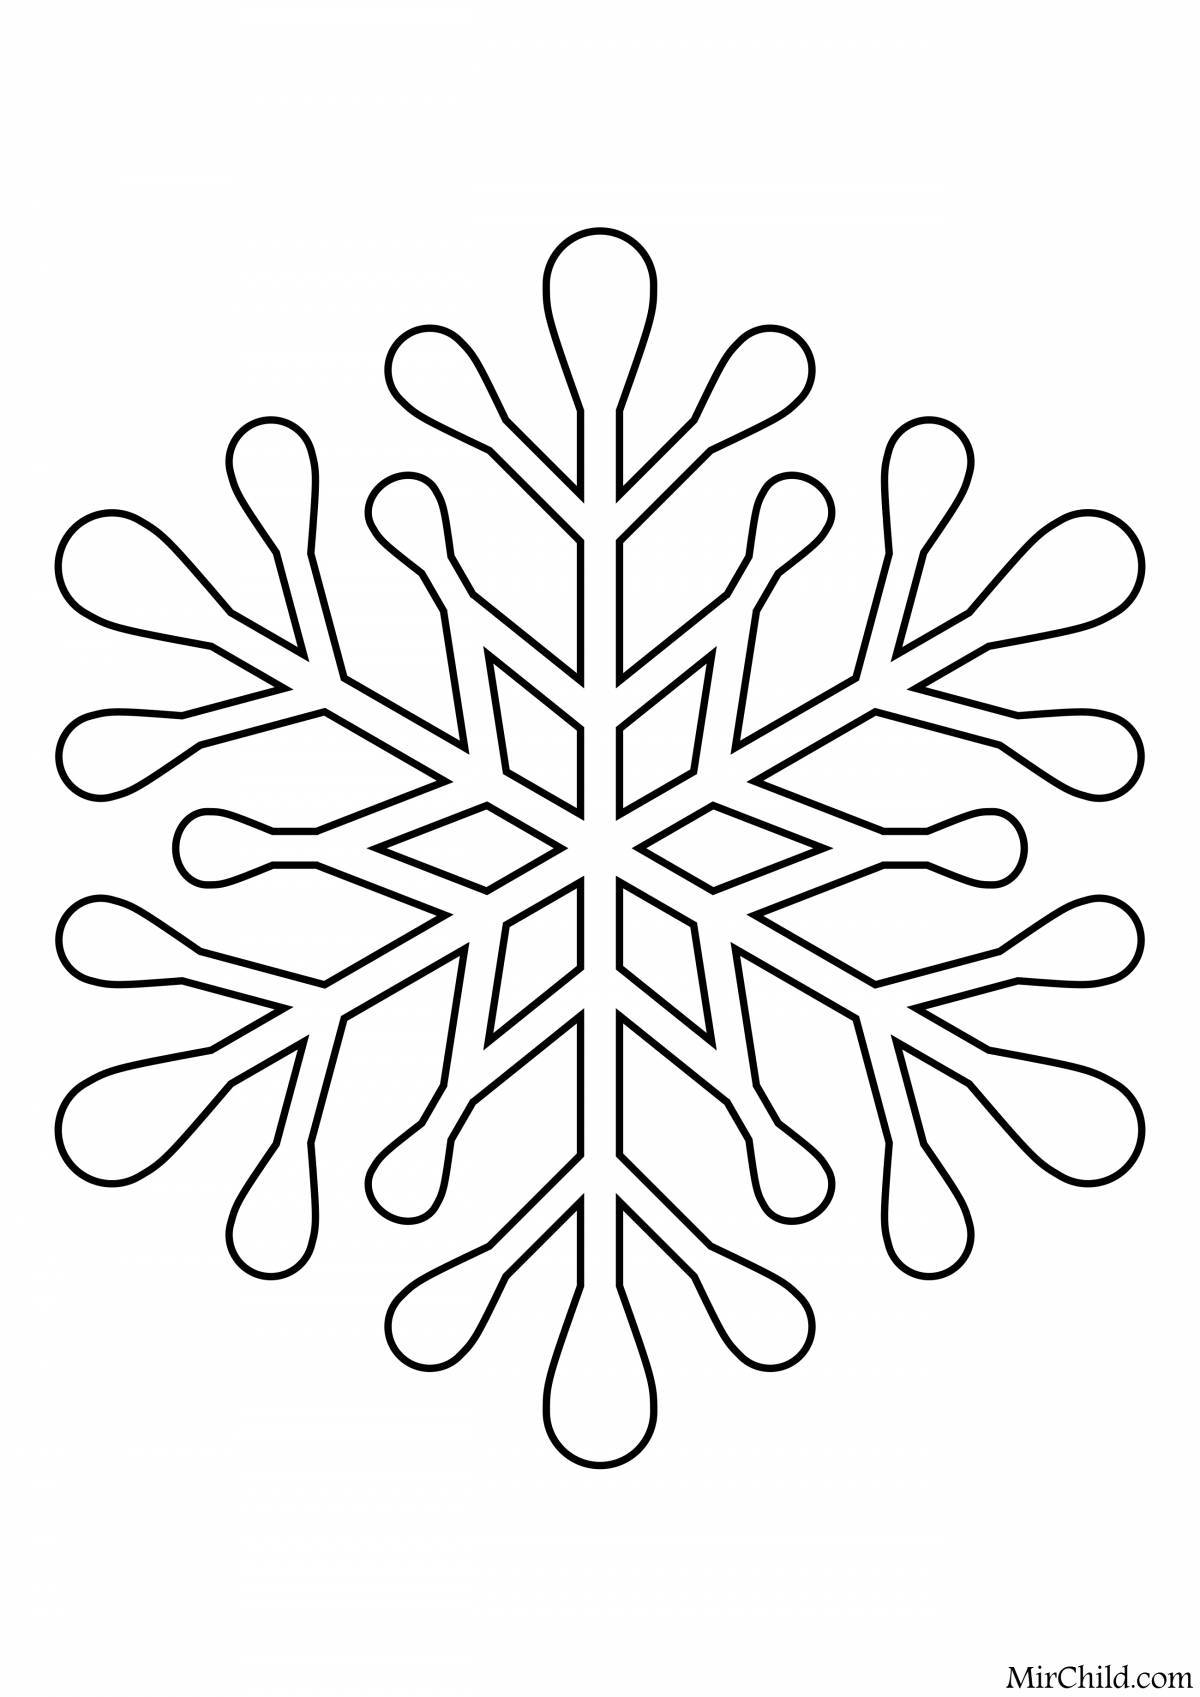 Cute snowflake coloring book for kids 5-6 years old